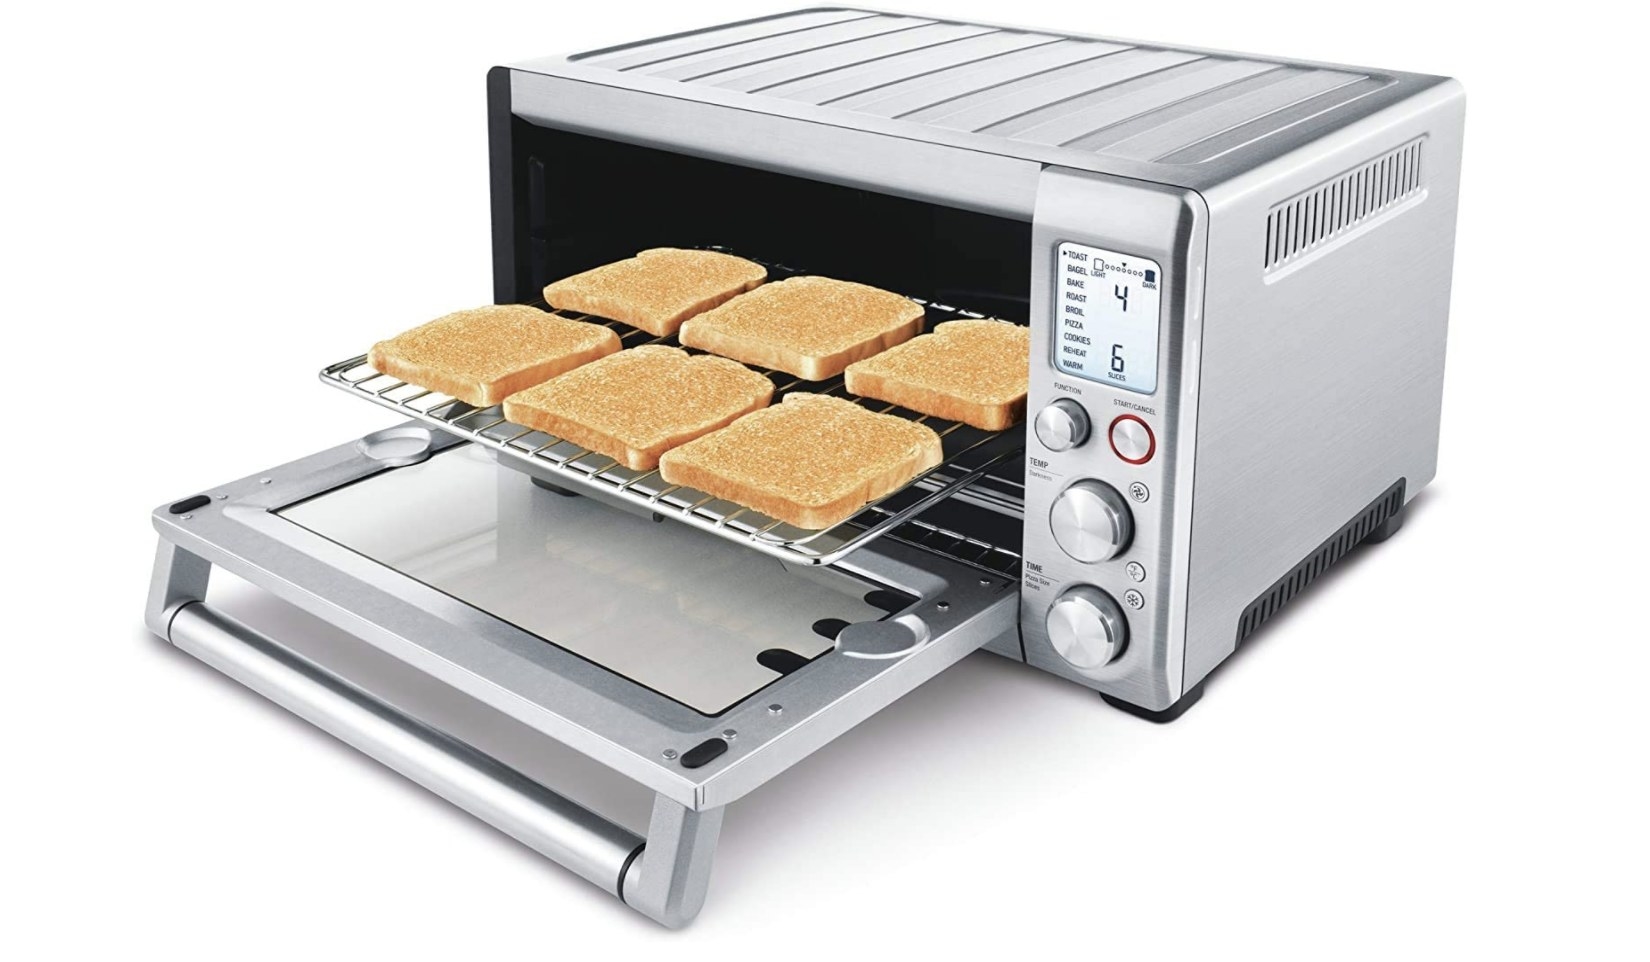 the toaster oven holding six pieces of toast